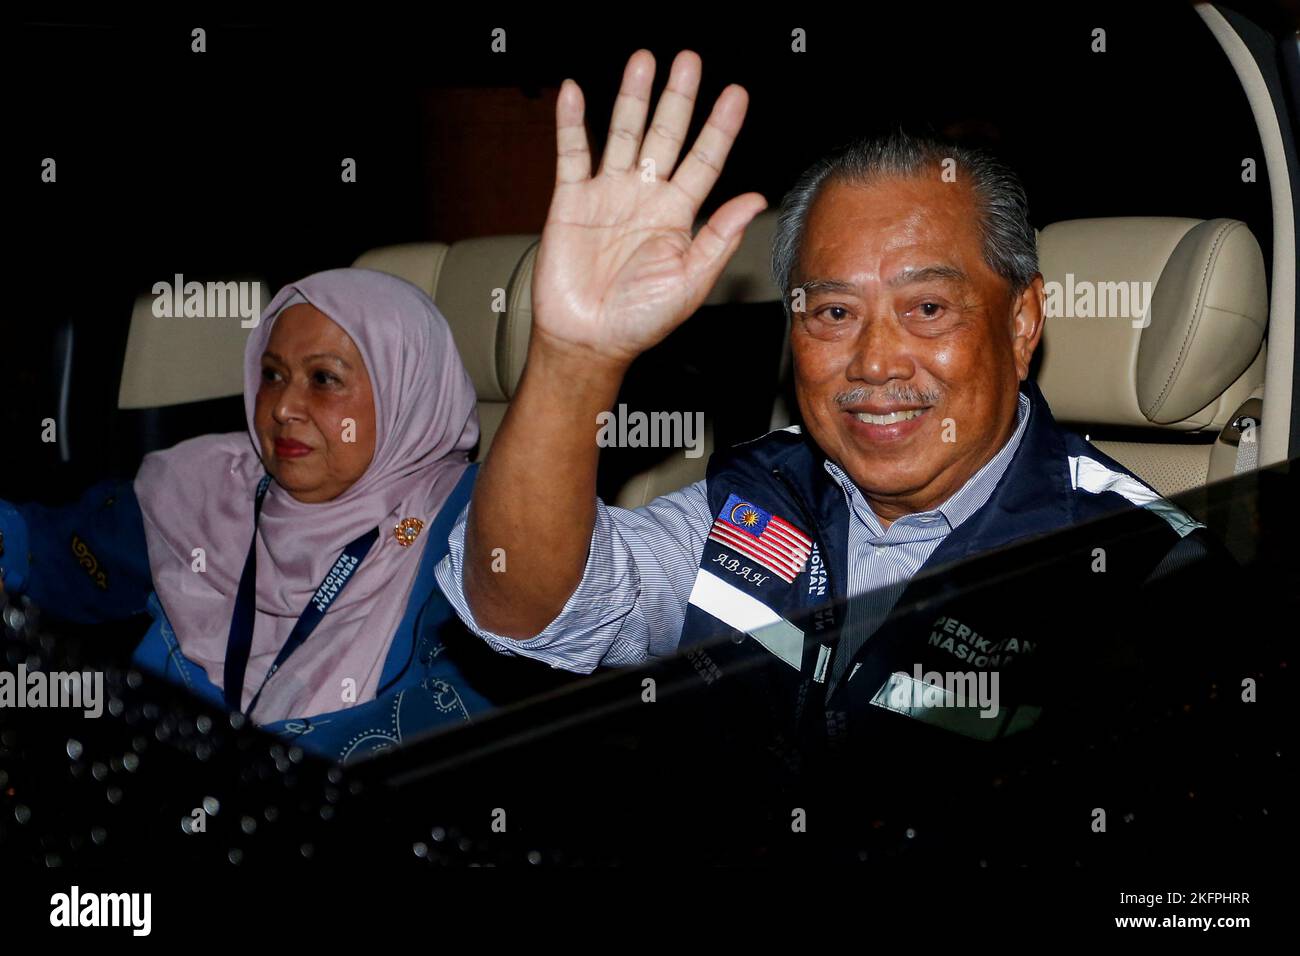 Malaysian former Prime Minister and Perikatan Nasional Chairman Muhyiddin Yassin waves as he leaves after Malaysia's 15th general election in Shah Alam, Malaysia November 20, 2022. REUTERS/Lai Seng Sin Stock Photo